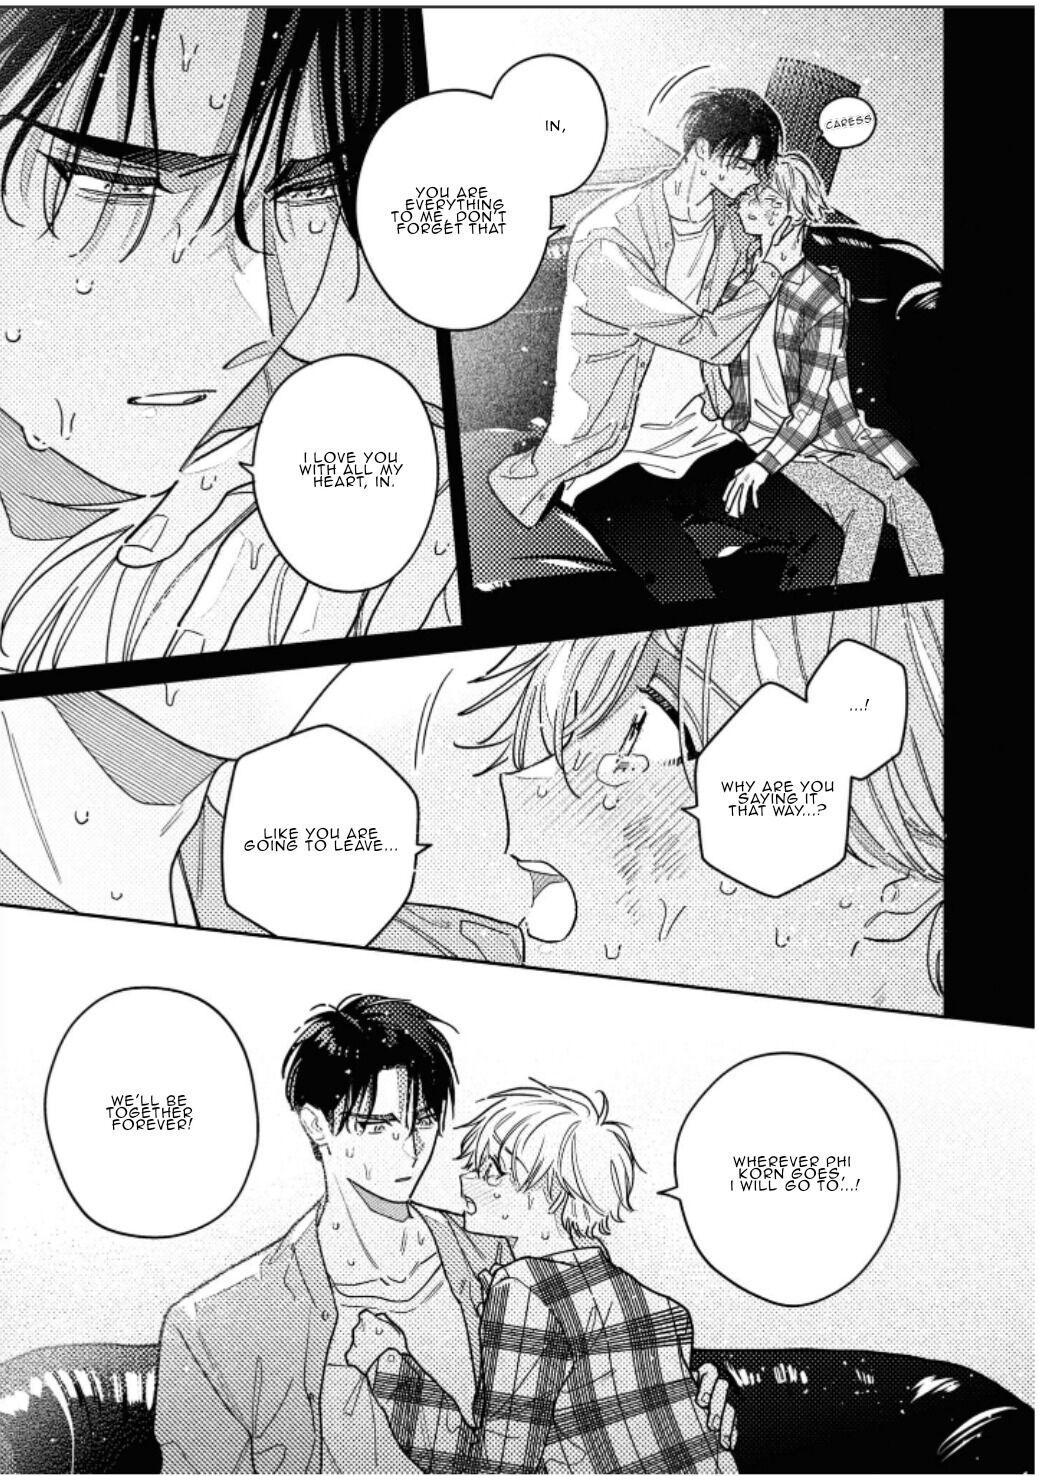 The Red Thread Chapter 6 The Red Thread Ch.1 Page 6 - Mangago